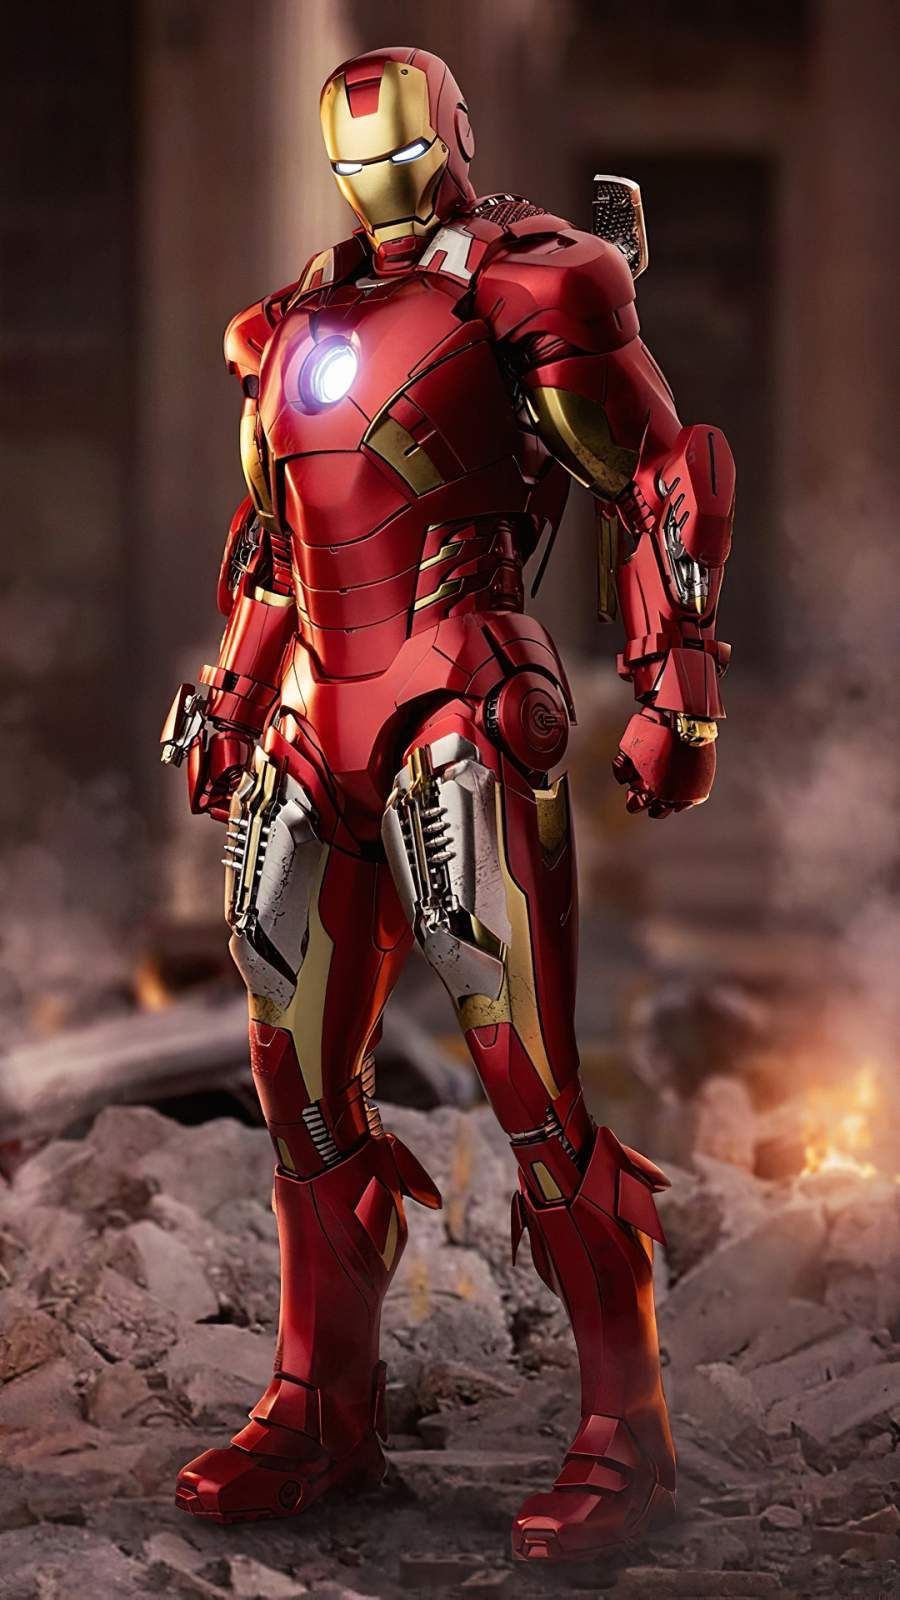 iPhone Wallpaper for iPhone iPhone 8 Plus, iPhone 6s, iPhone 6s Plus, iPhone X and iPod Touch High Quality Wa. Iron man armor, Iron man HD wallpaper, Iron man